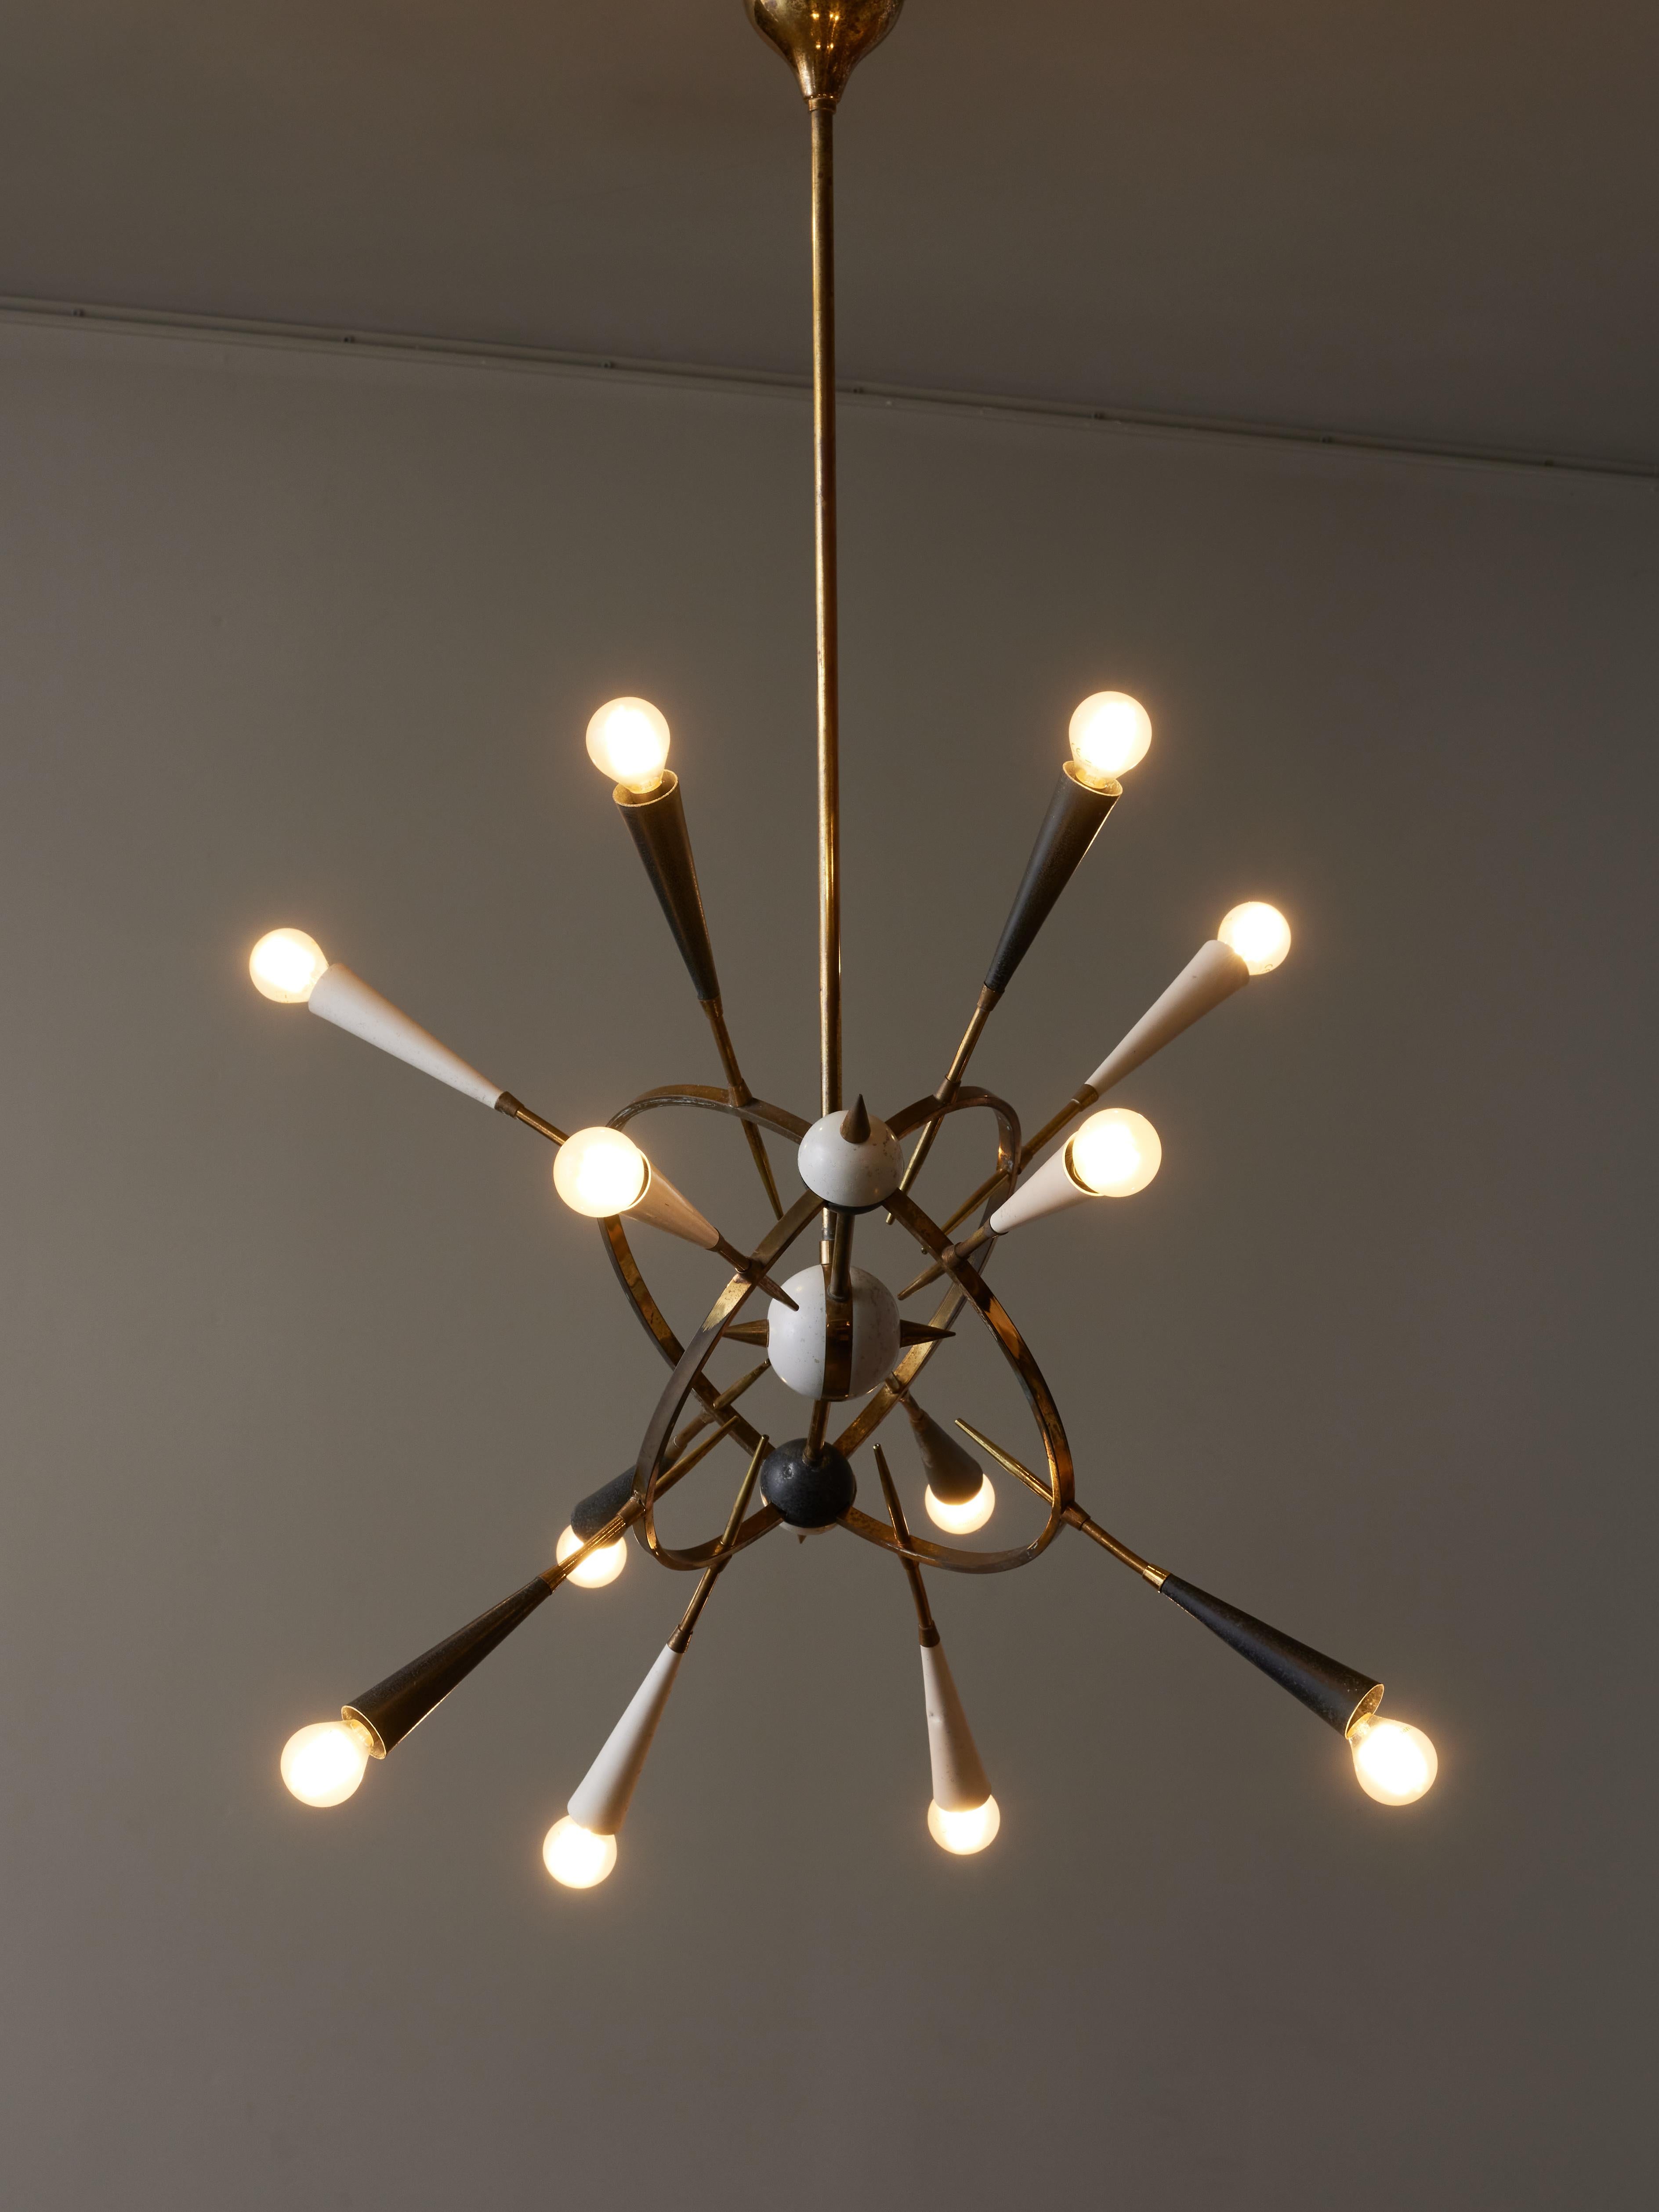 Sputnik style chandelier designed by Oscar Torlasco, made of brass and enameled metal.

Six arms of light with white or black cones are set into two concentric brass arcs, pointing toward the central decorative sphere.


Oscar Torlasco